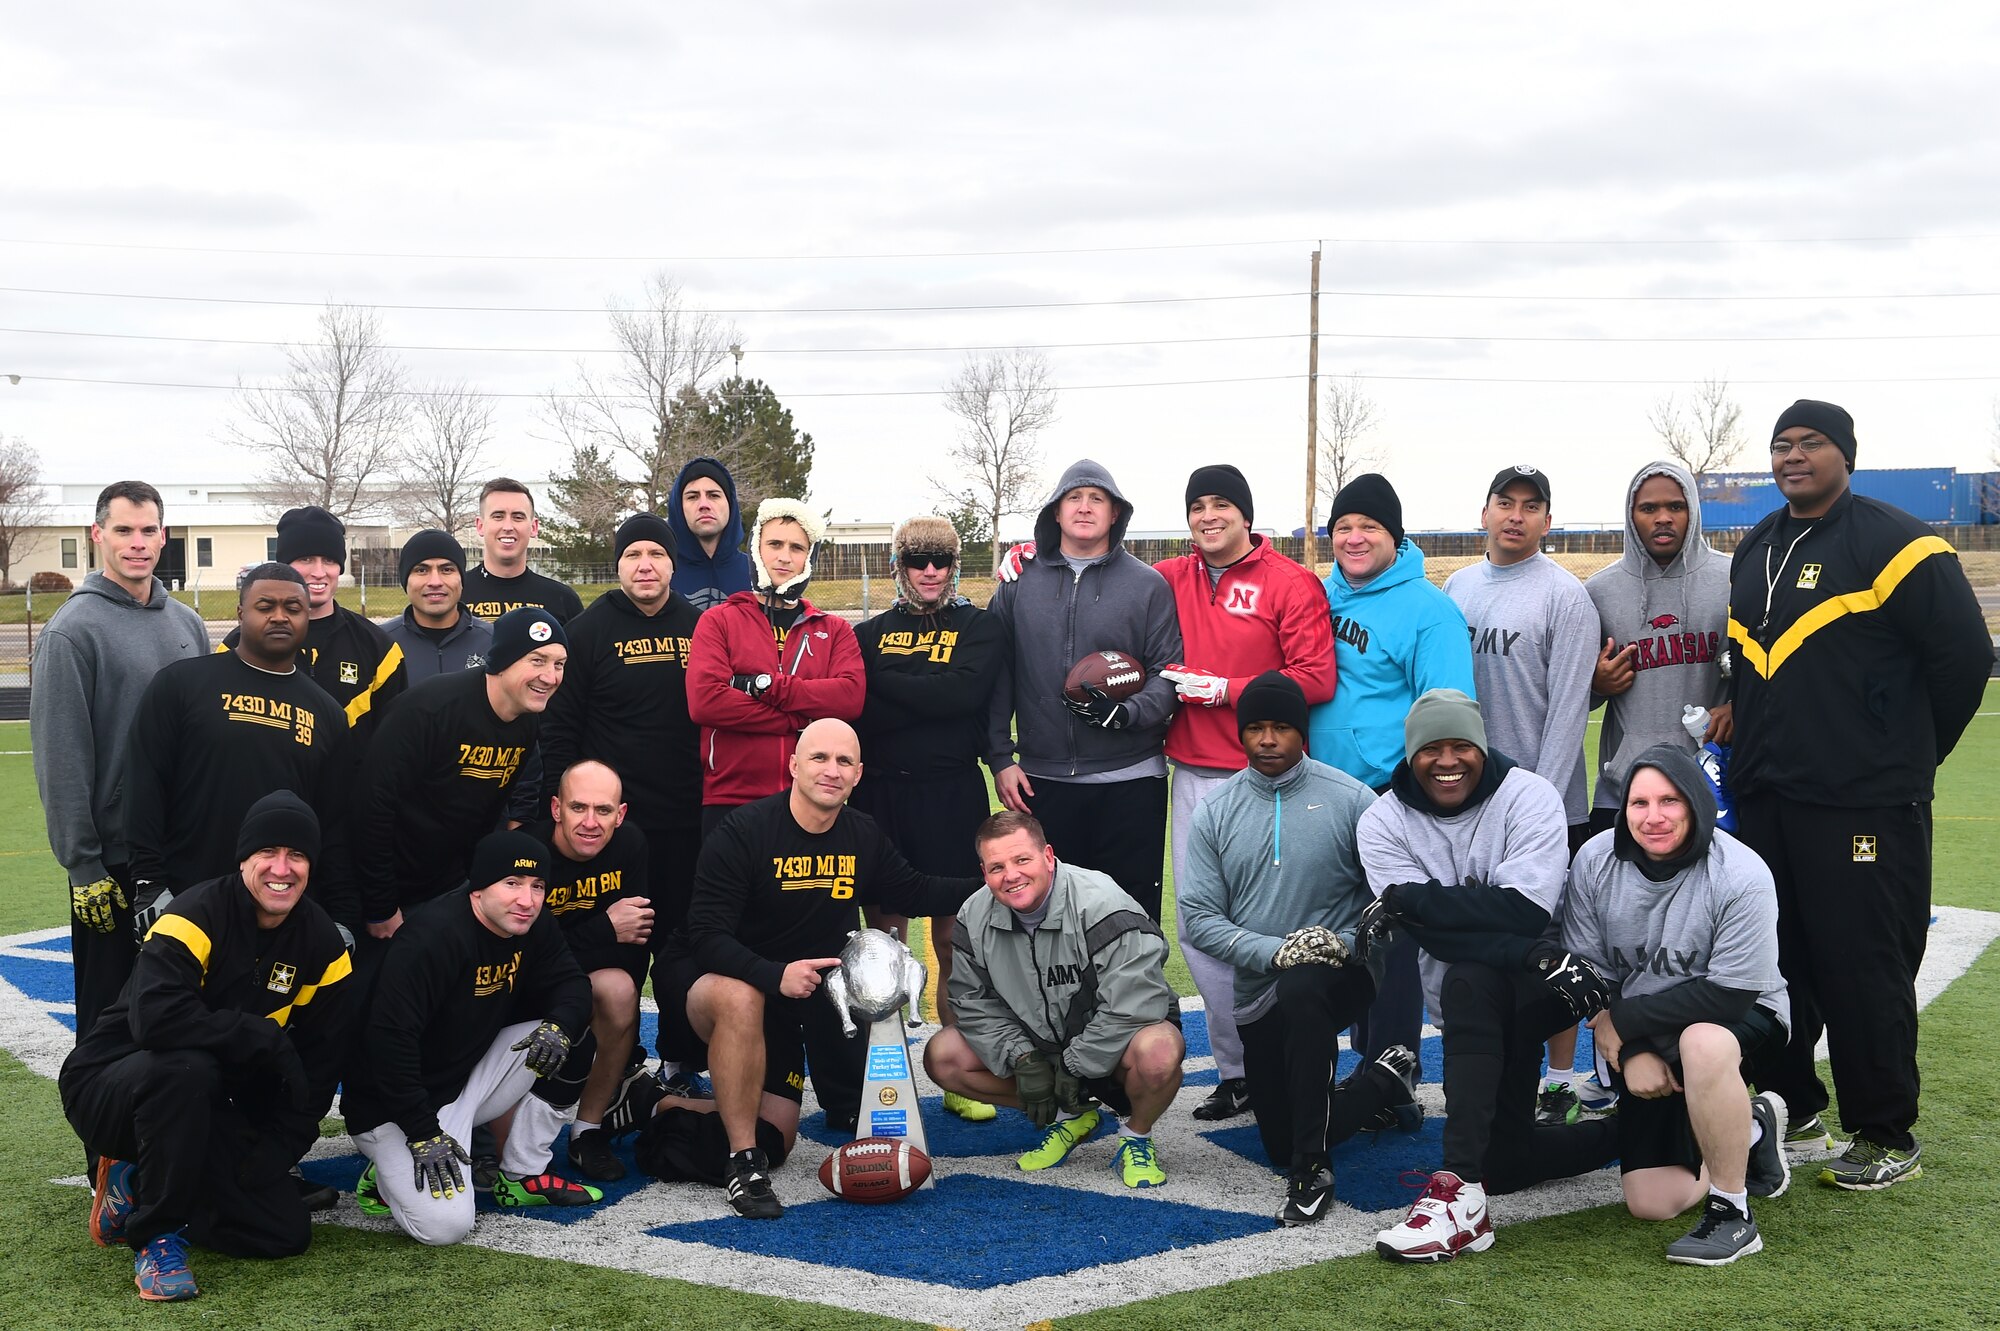 Officers and senior NCOs from the 743rd Military Intelligence Battalion squared off in the annual Army Turkey Bowl Nov. 25, 2015, on Buckley Air Force Base, Colo.  The final outcome of the game was 24 to 18 with the officers walking away with the victory. (U.S. Air Force photo by Airman 1st Class Luke W. Nowakowski/Released)